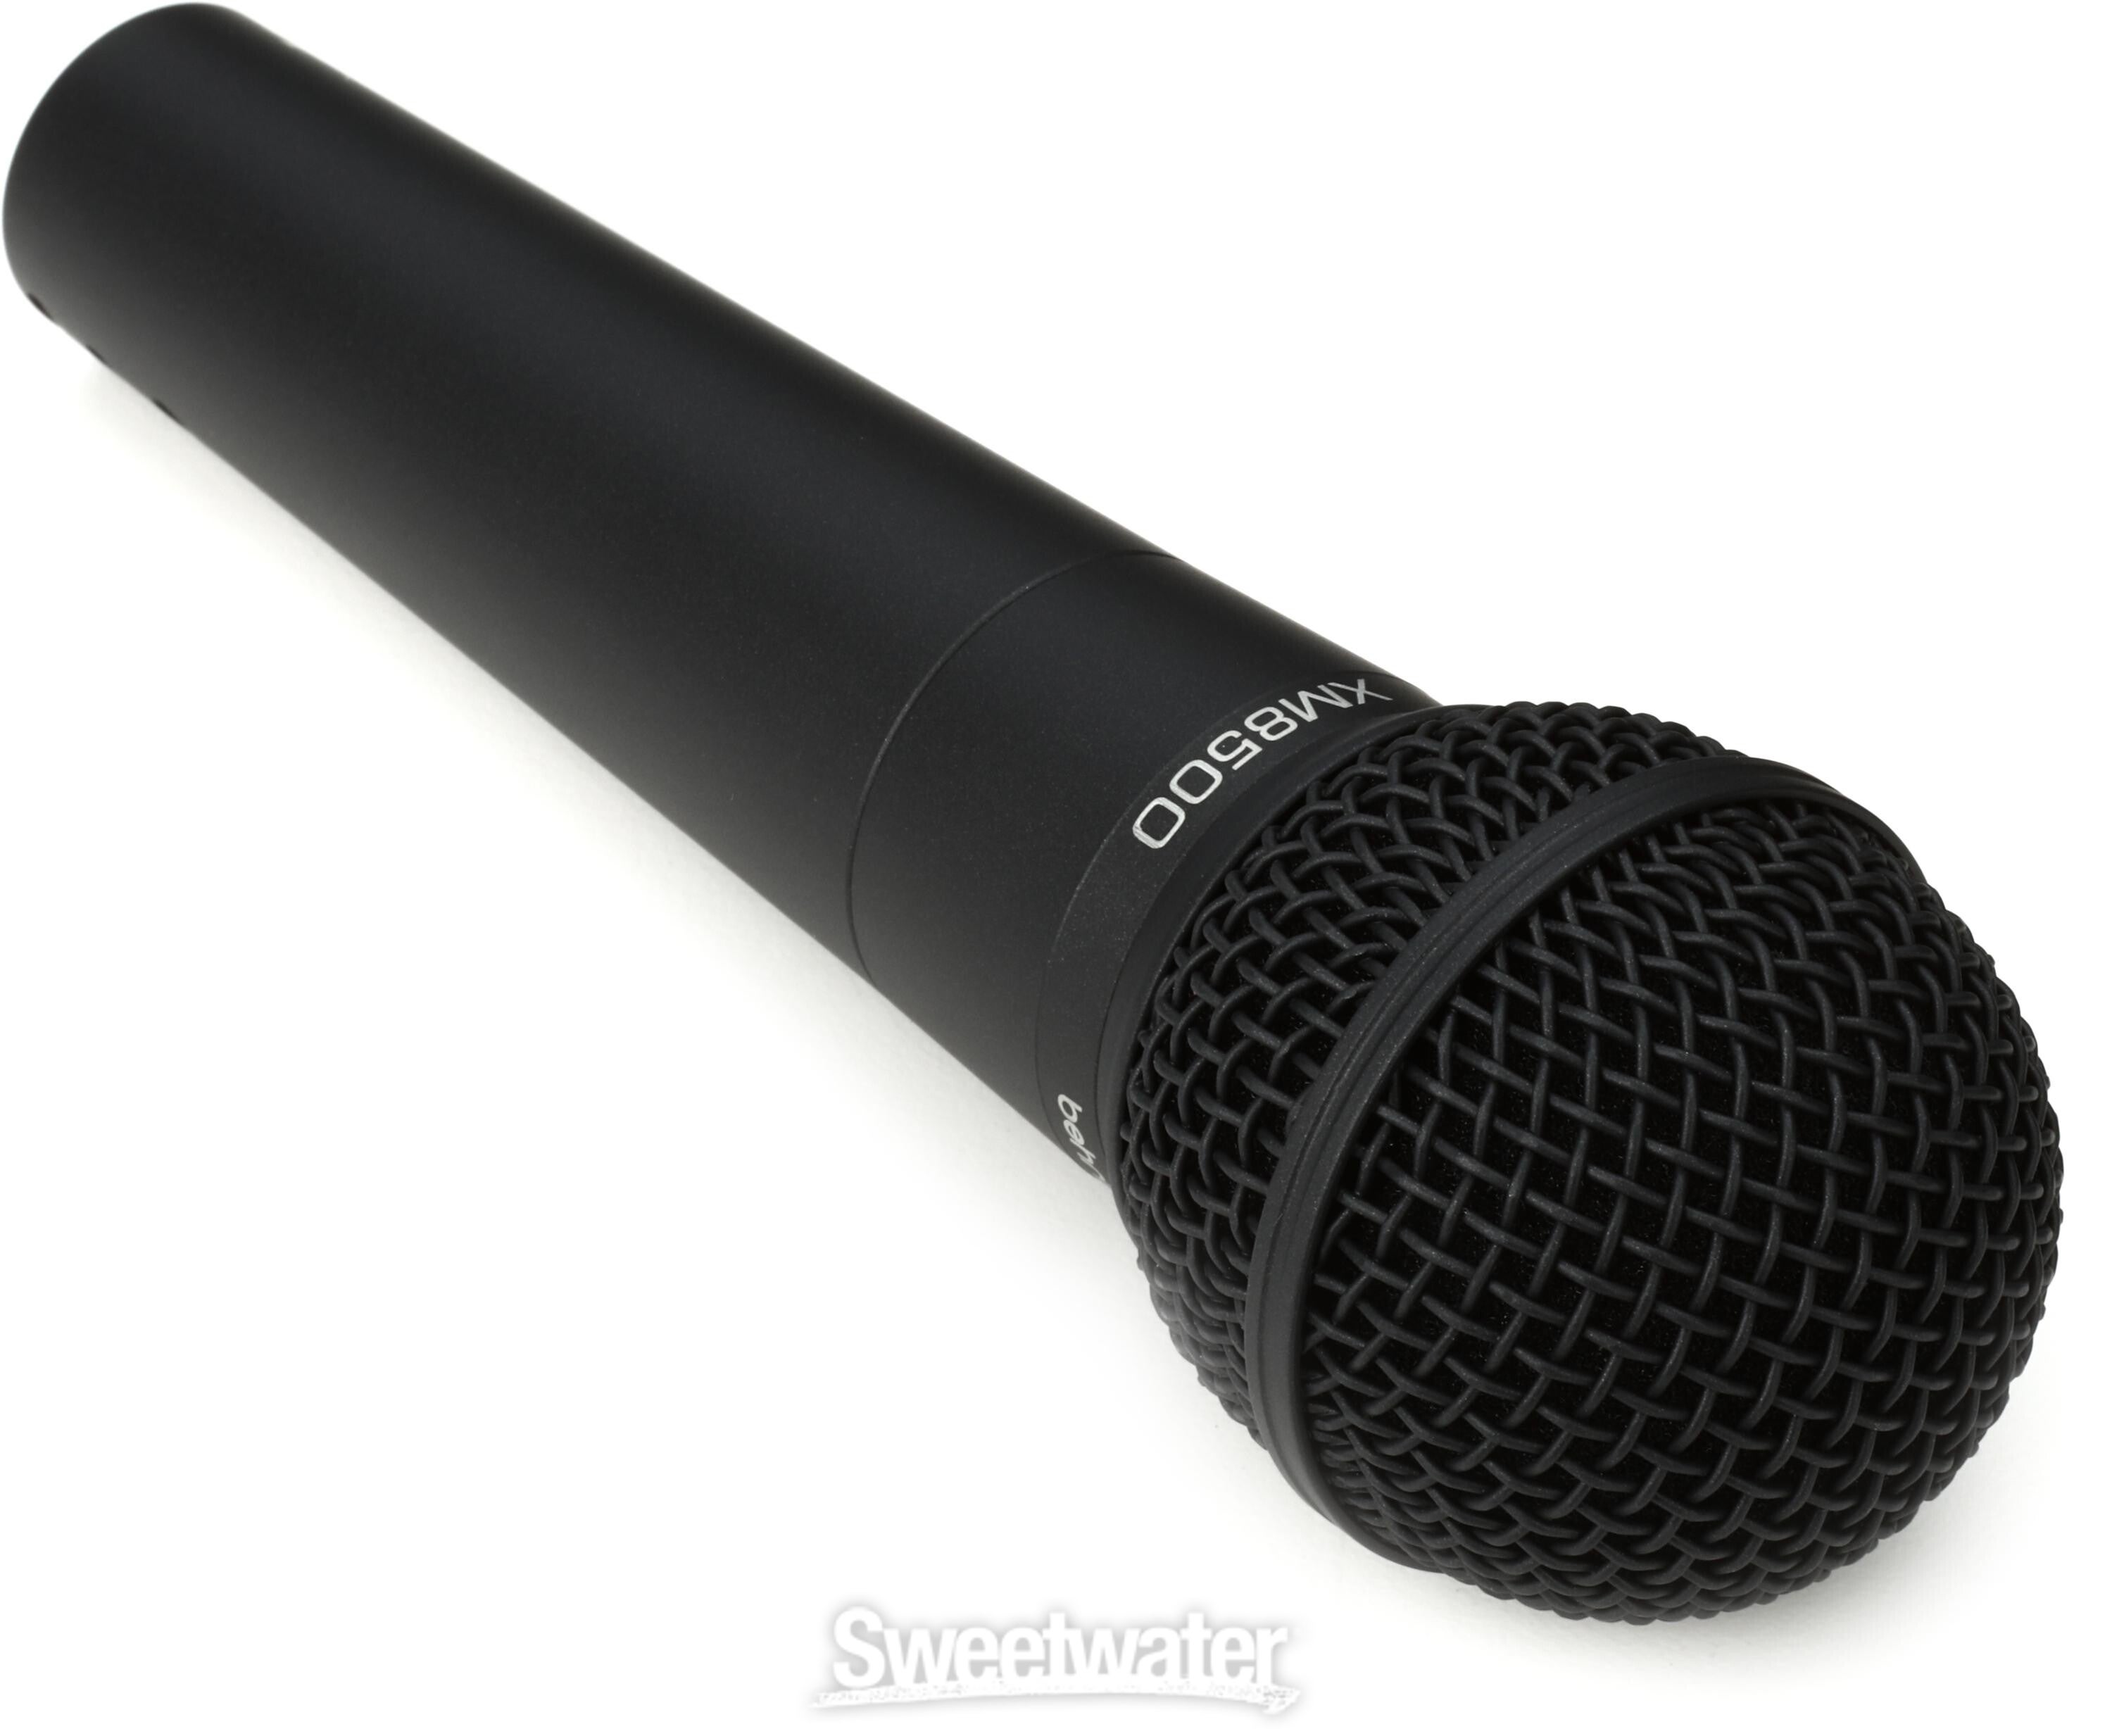 Behringer XM8500 Cardioid Dynamic Vocal Microphone Reviews 